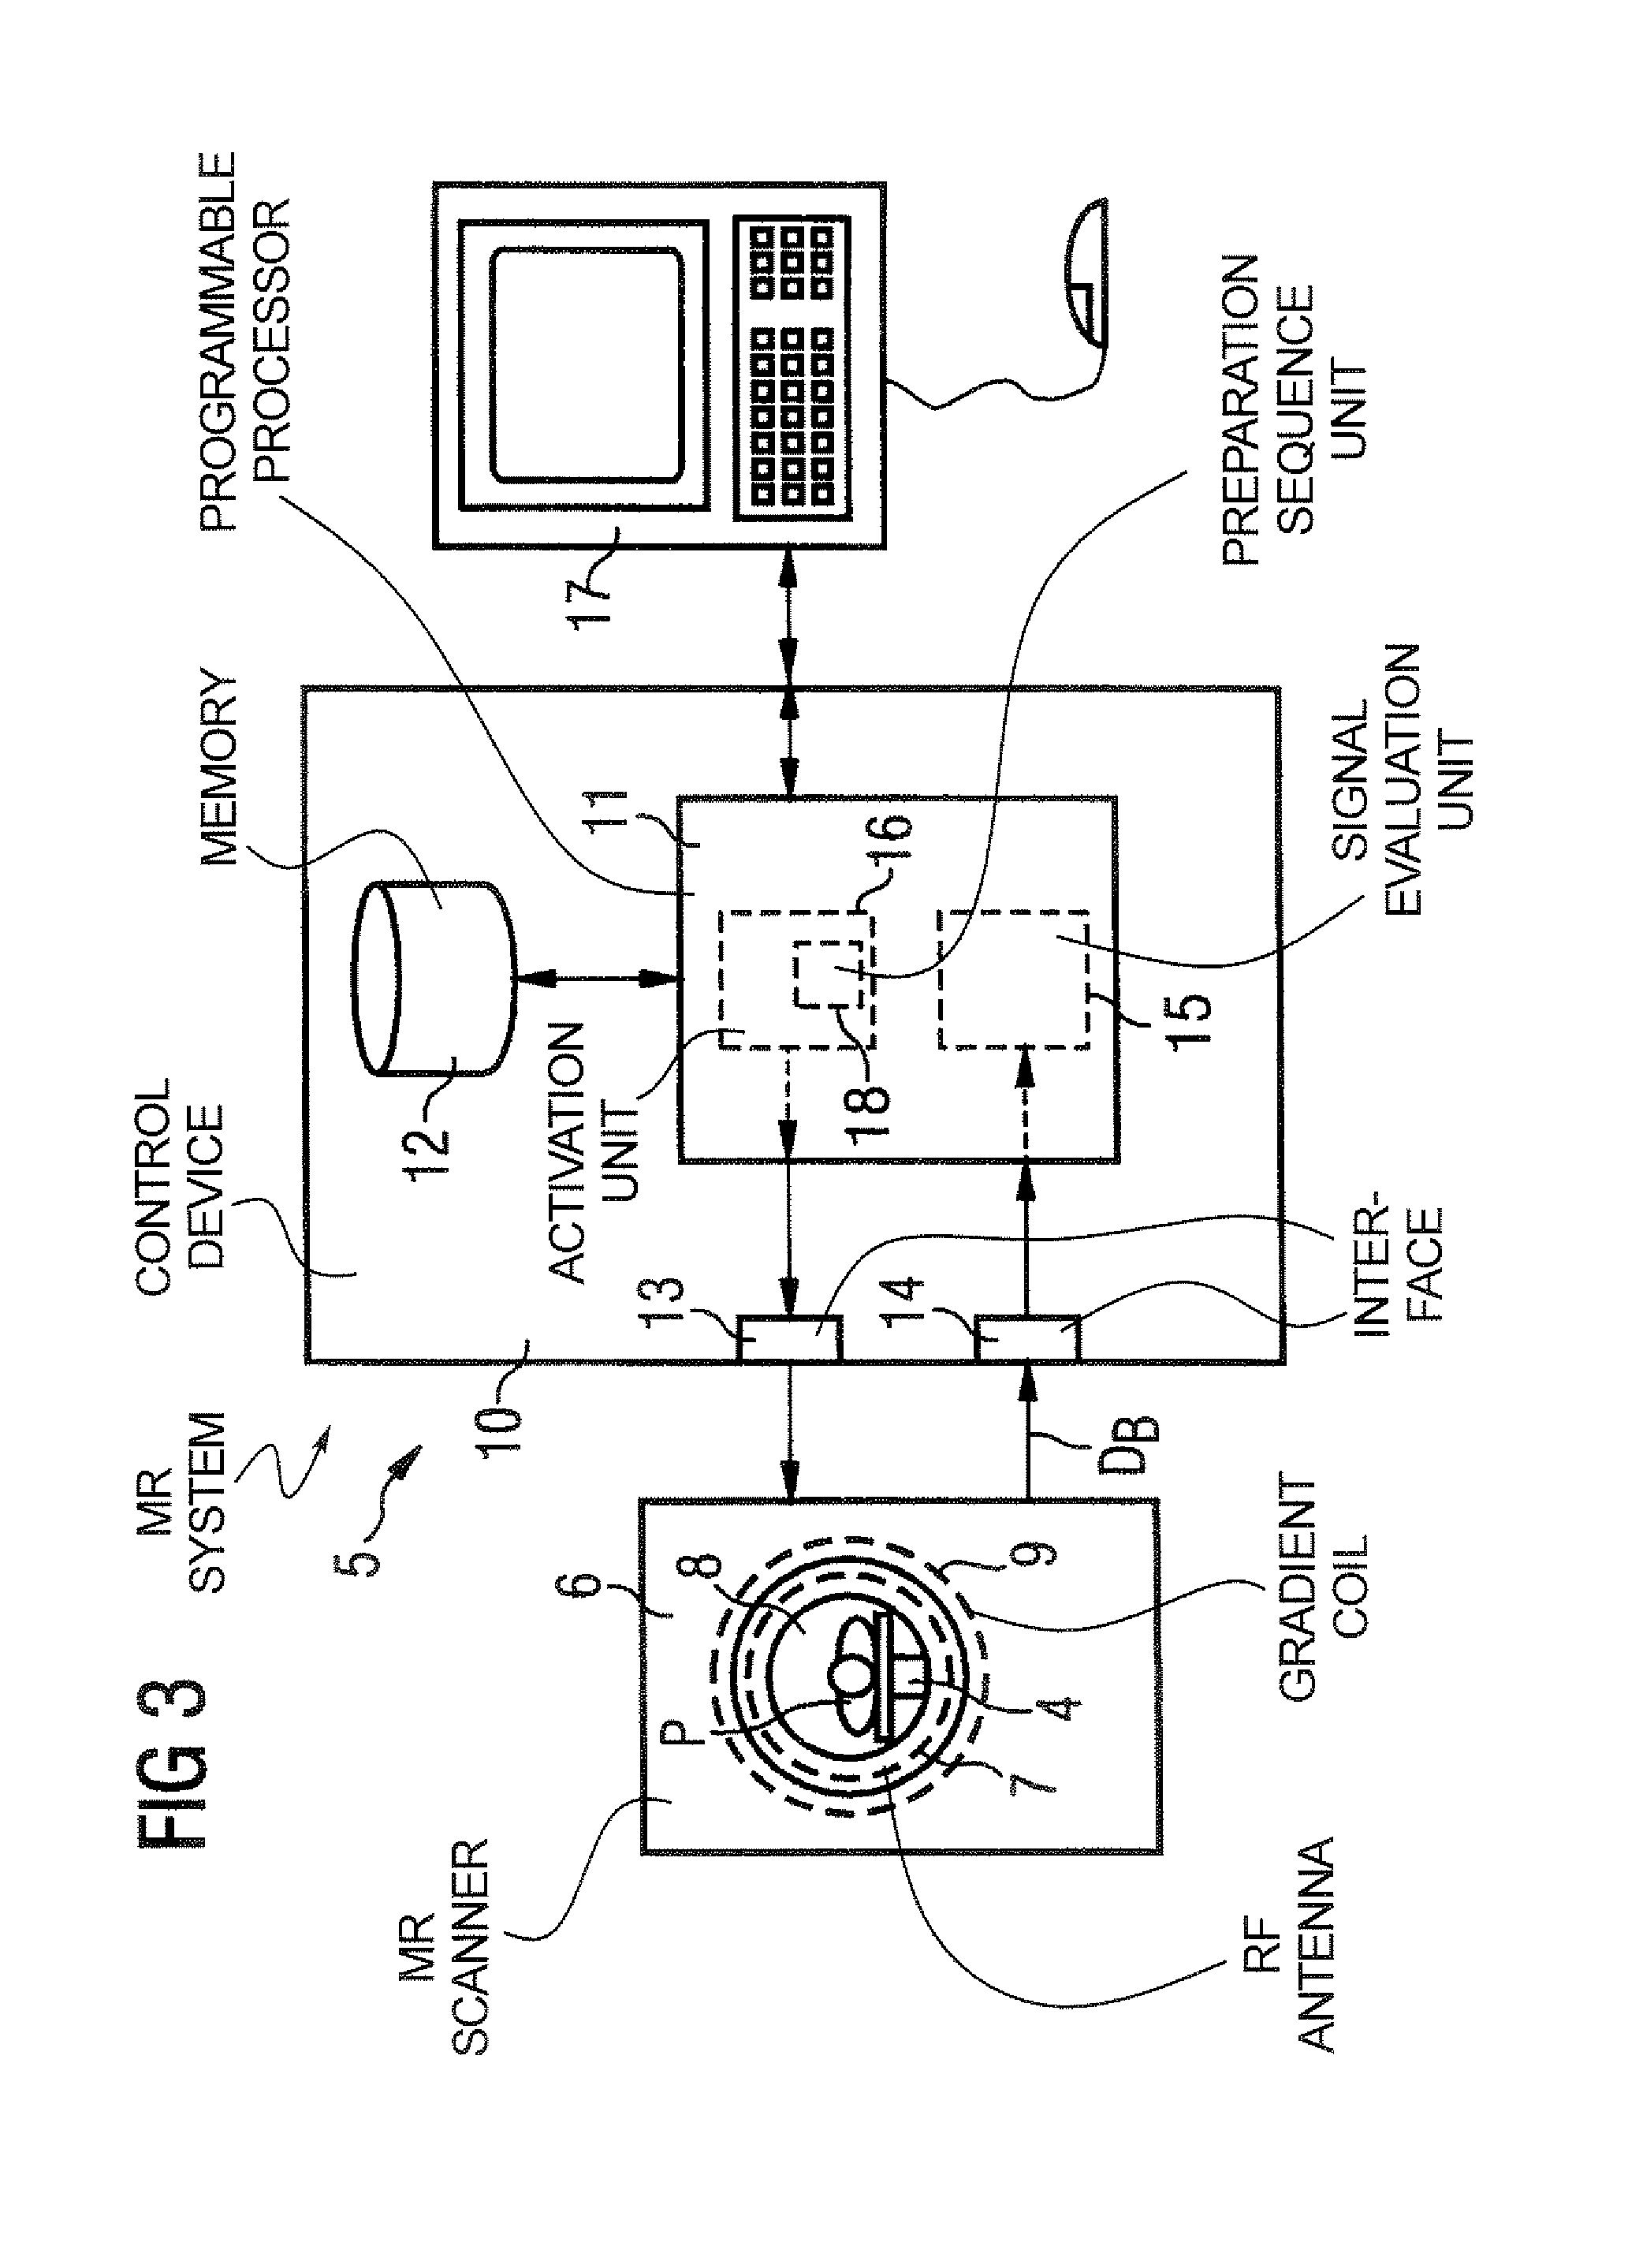 Method, dielectric element, and MR system for generating an MR exposure